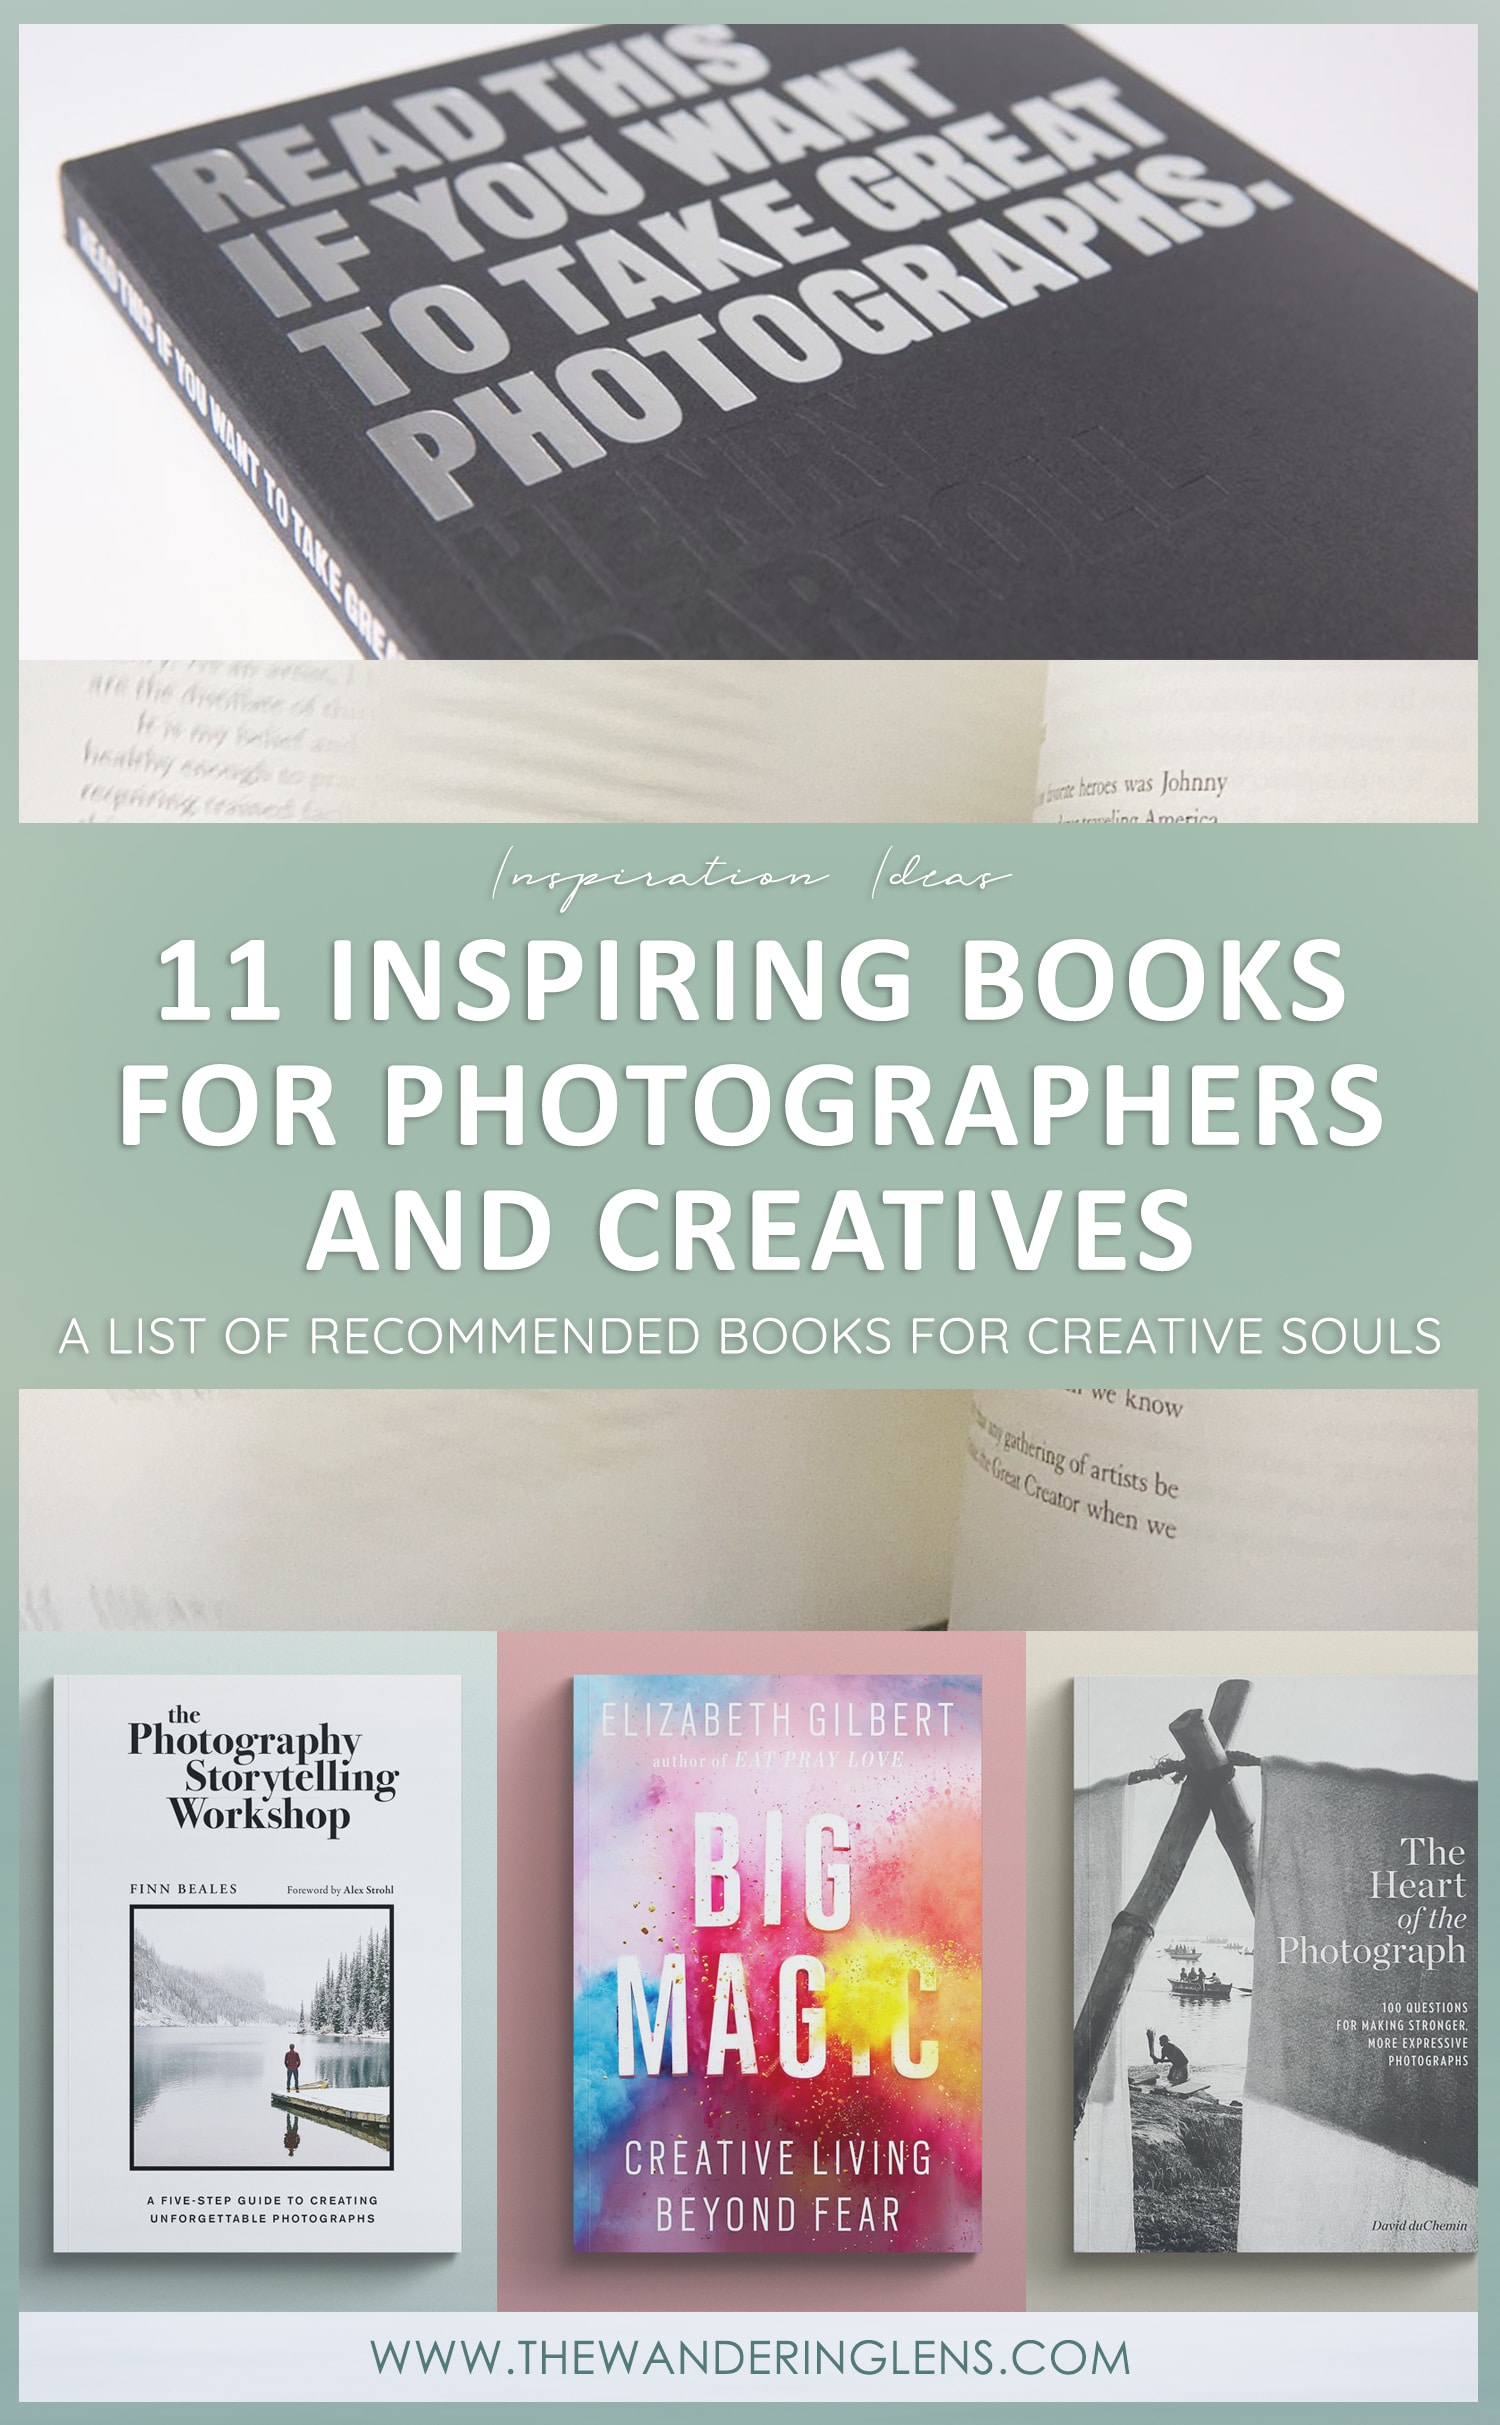 Inspiring photography books and creative business books